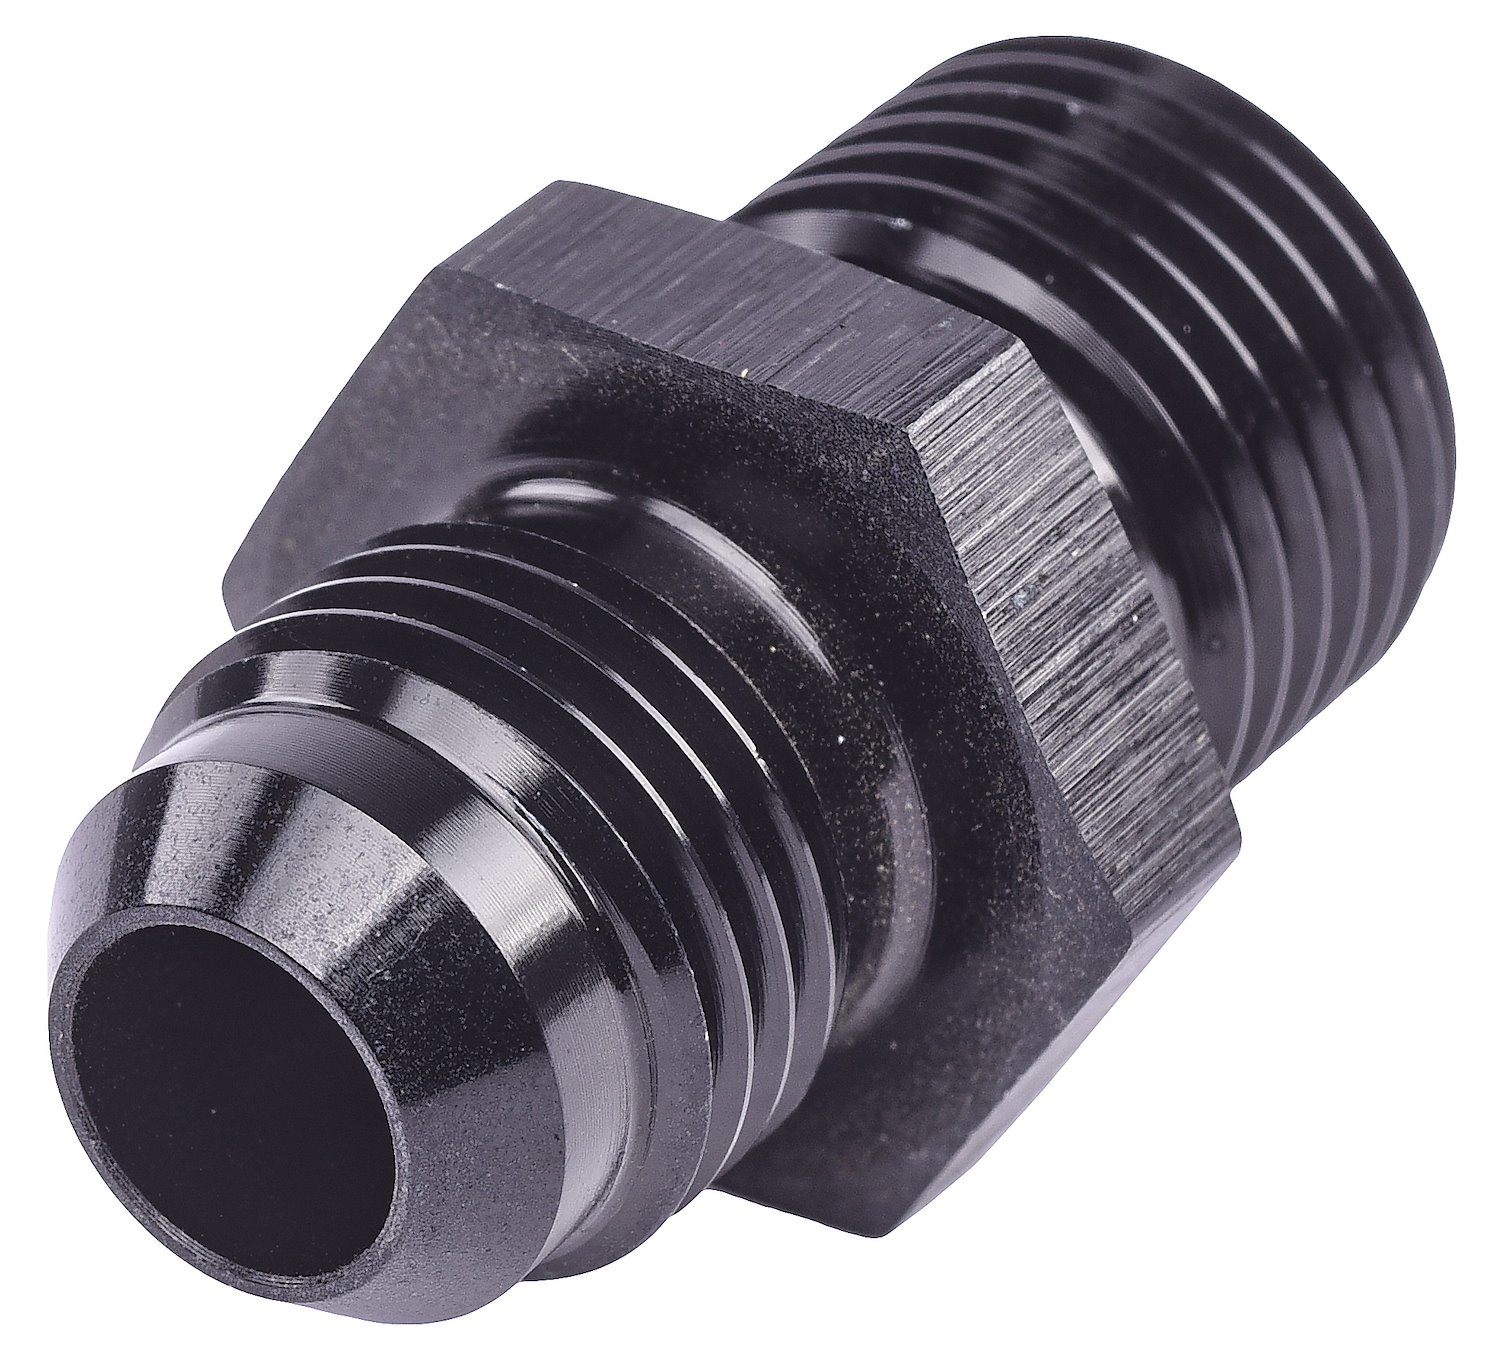 AN to Metric Adapter Fitting [-6 AN Male to 16mm x 1.5 Male, Black]